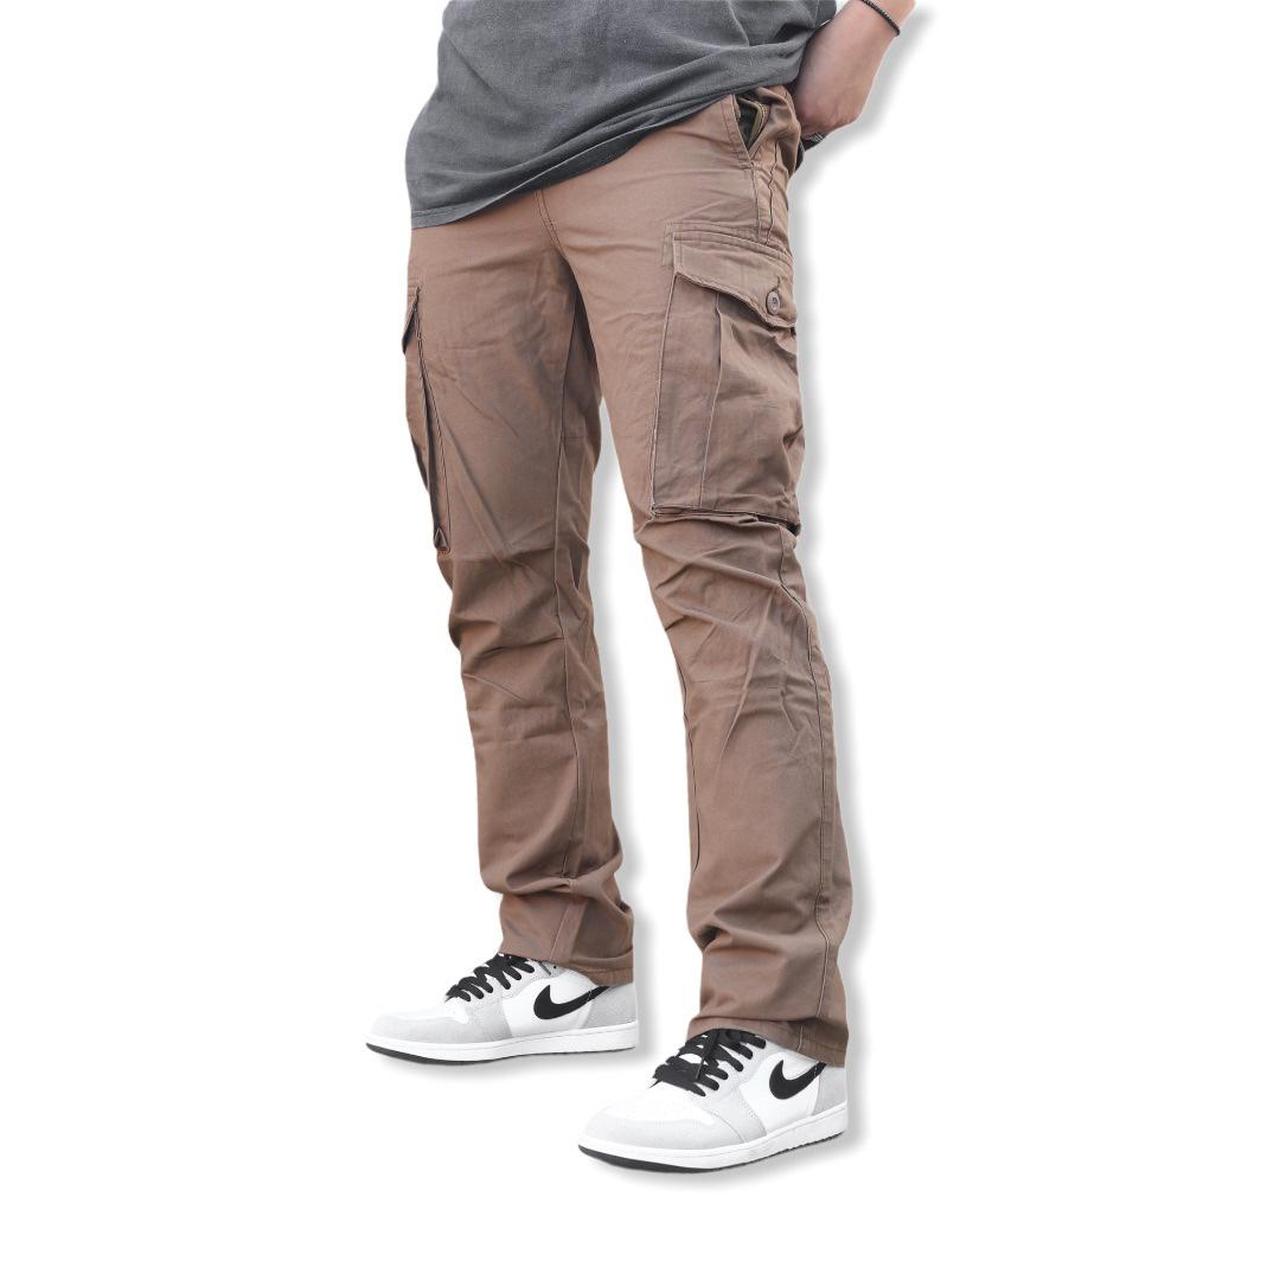 Product Image 1 - Cargo Pants Mocha Brown
• Sightly